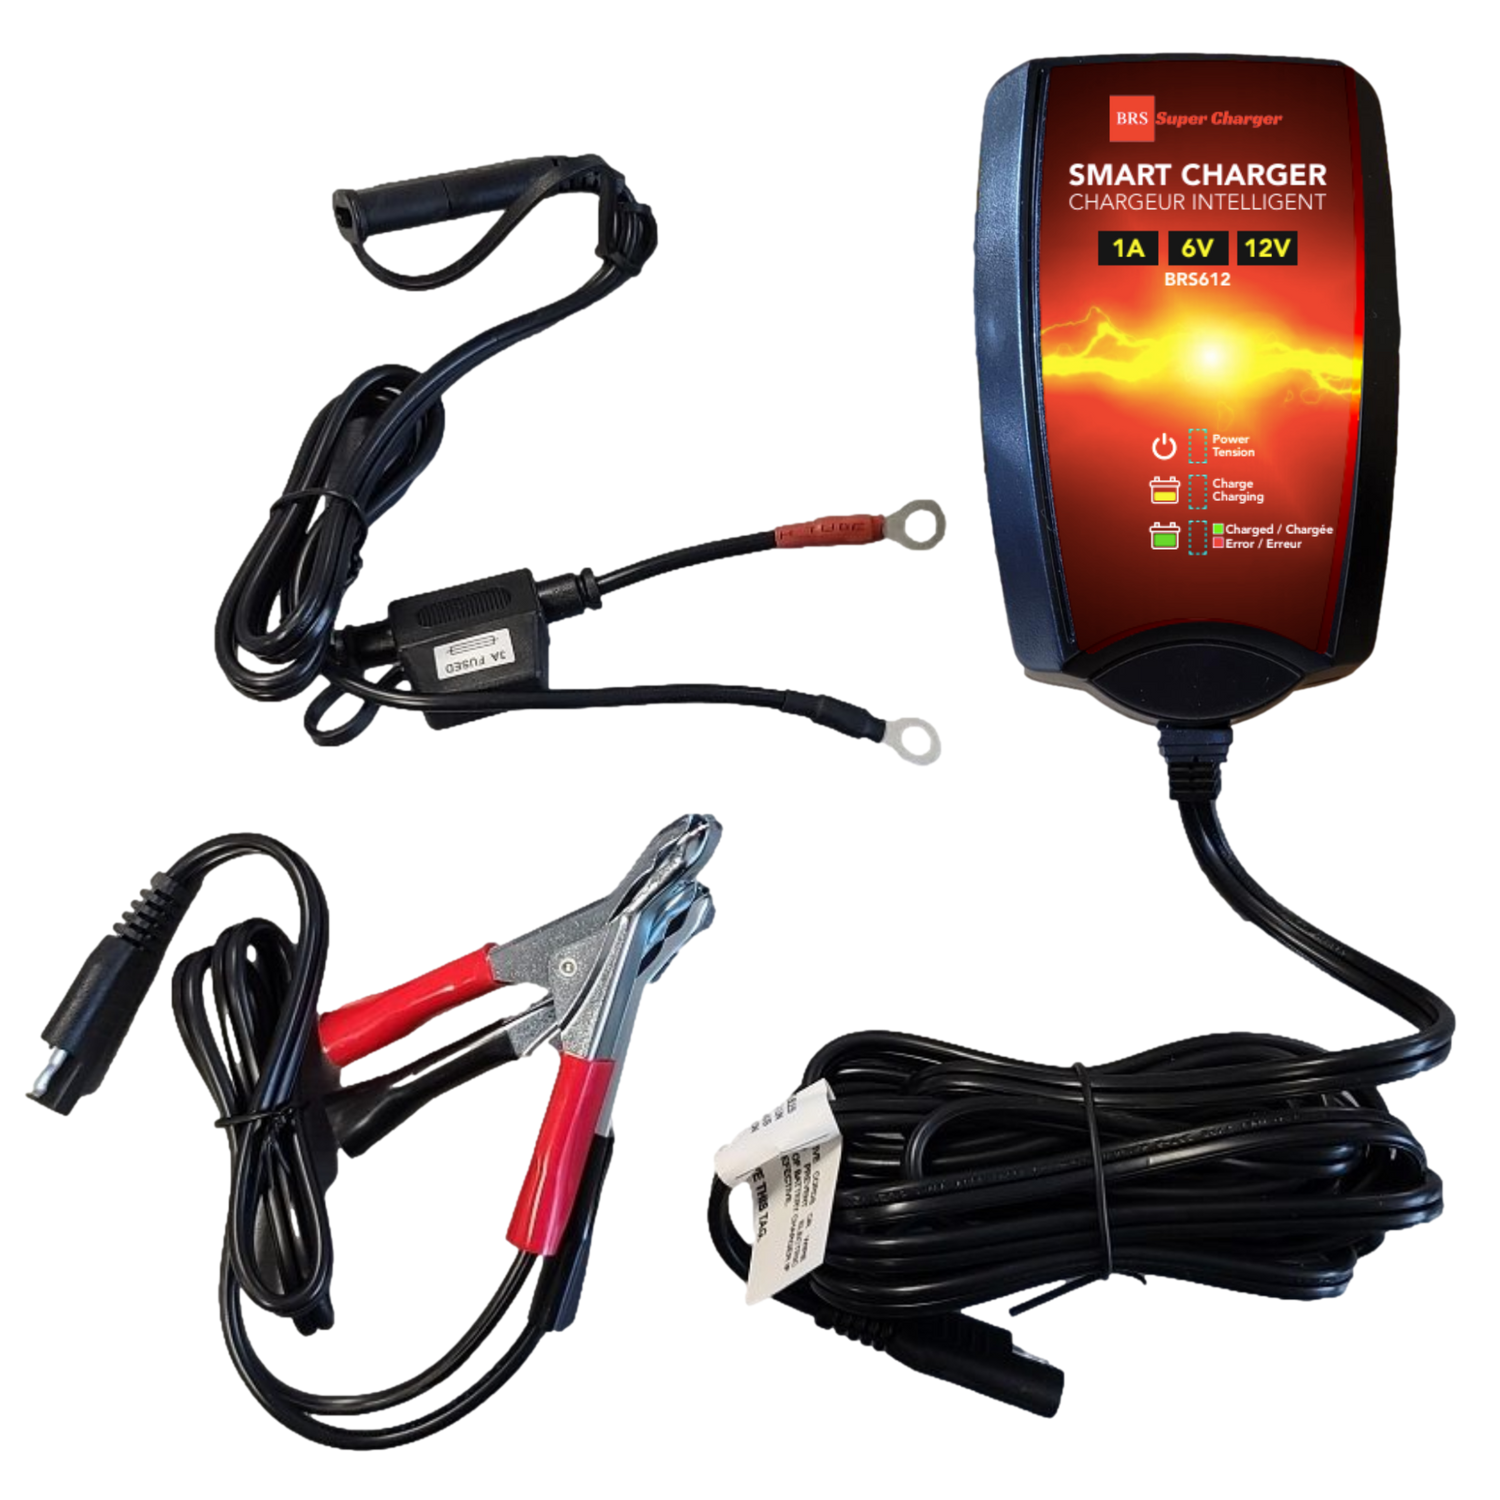 High Performance BRS14AHL-BS 2 Year Battery & Smart Charger / Maintainer Combo Bundle Kit  12v Sealed AGM PowerSports Battery - BRS Super Battery